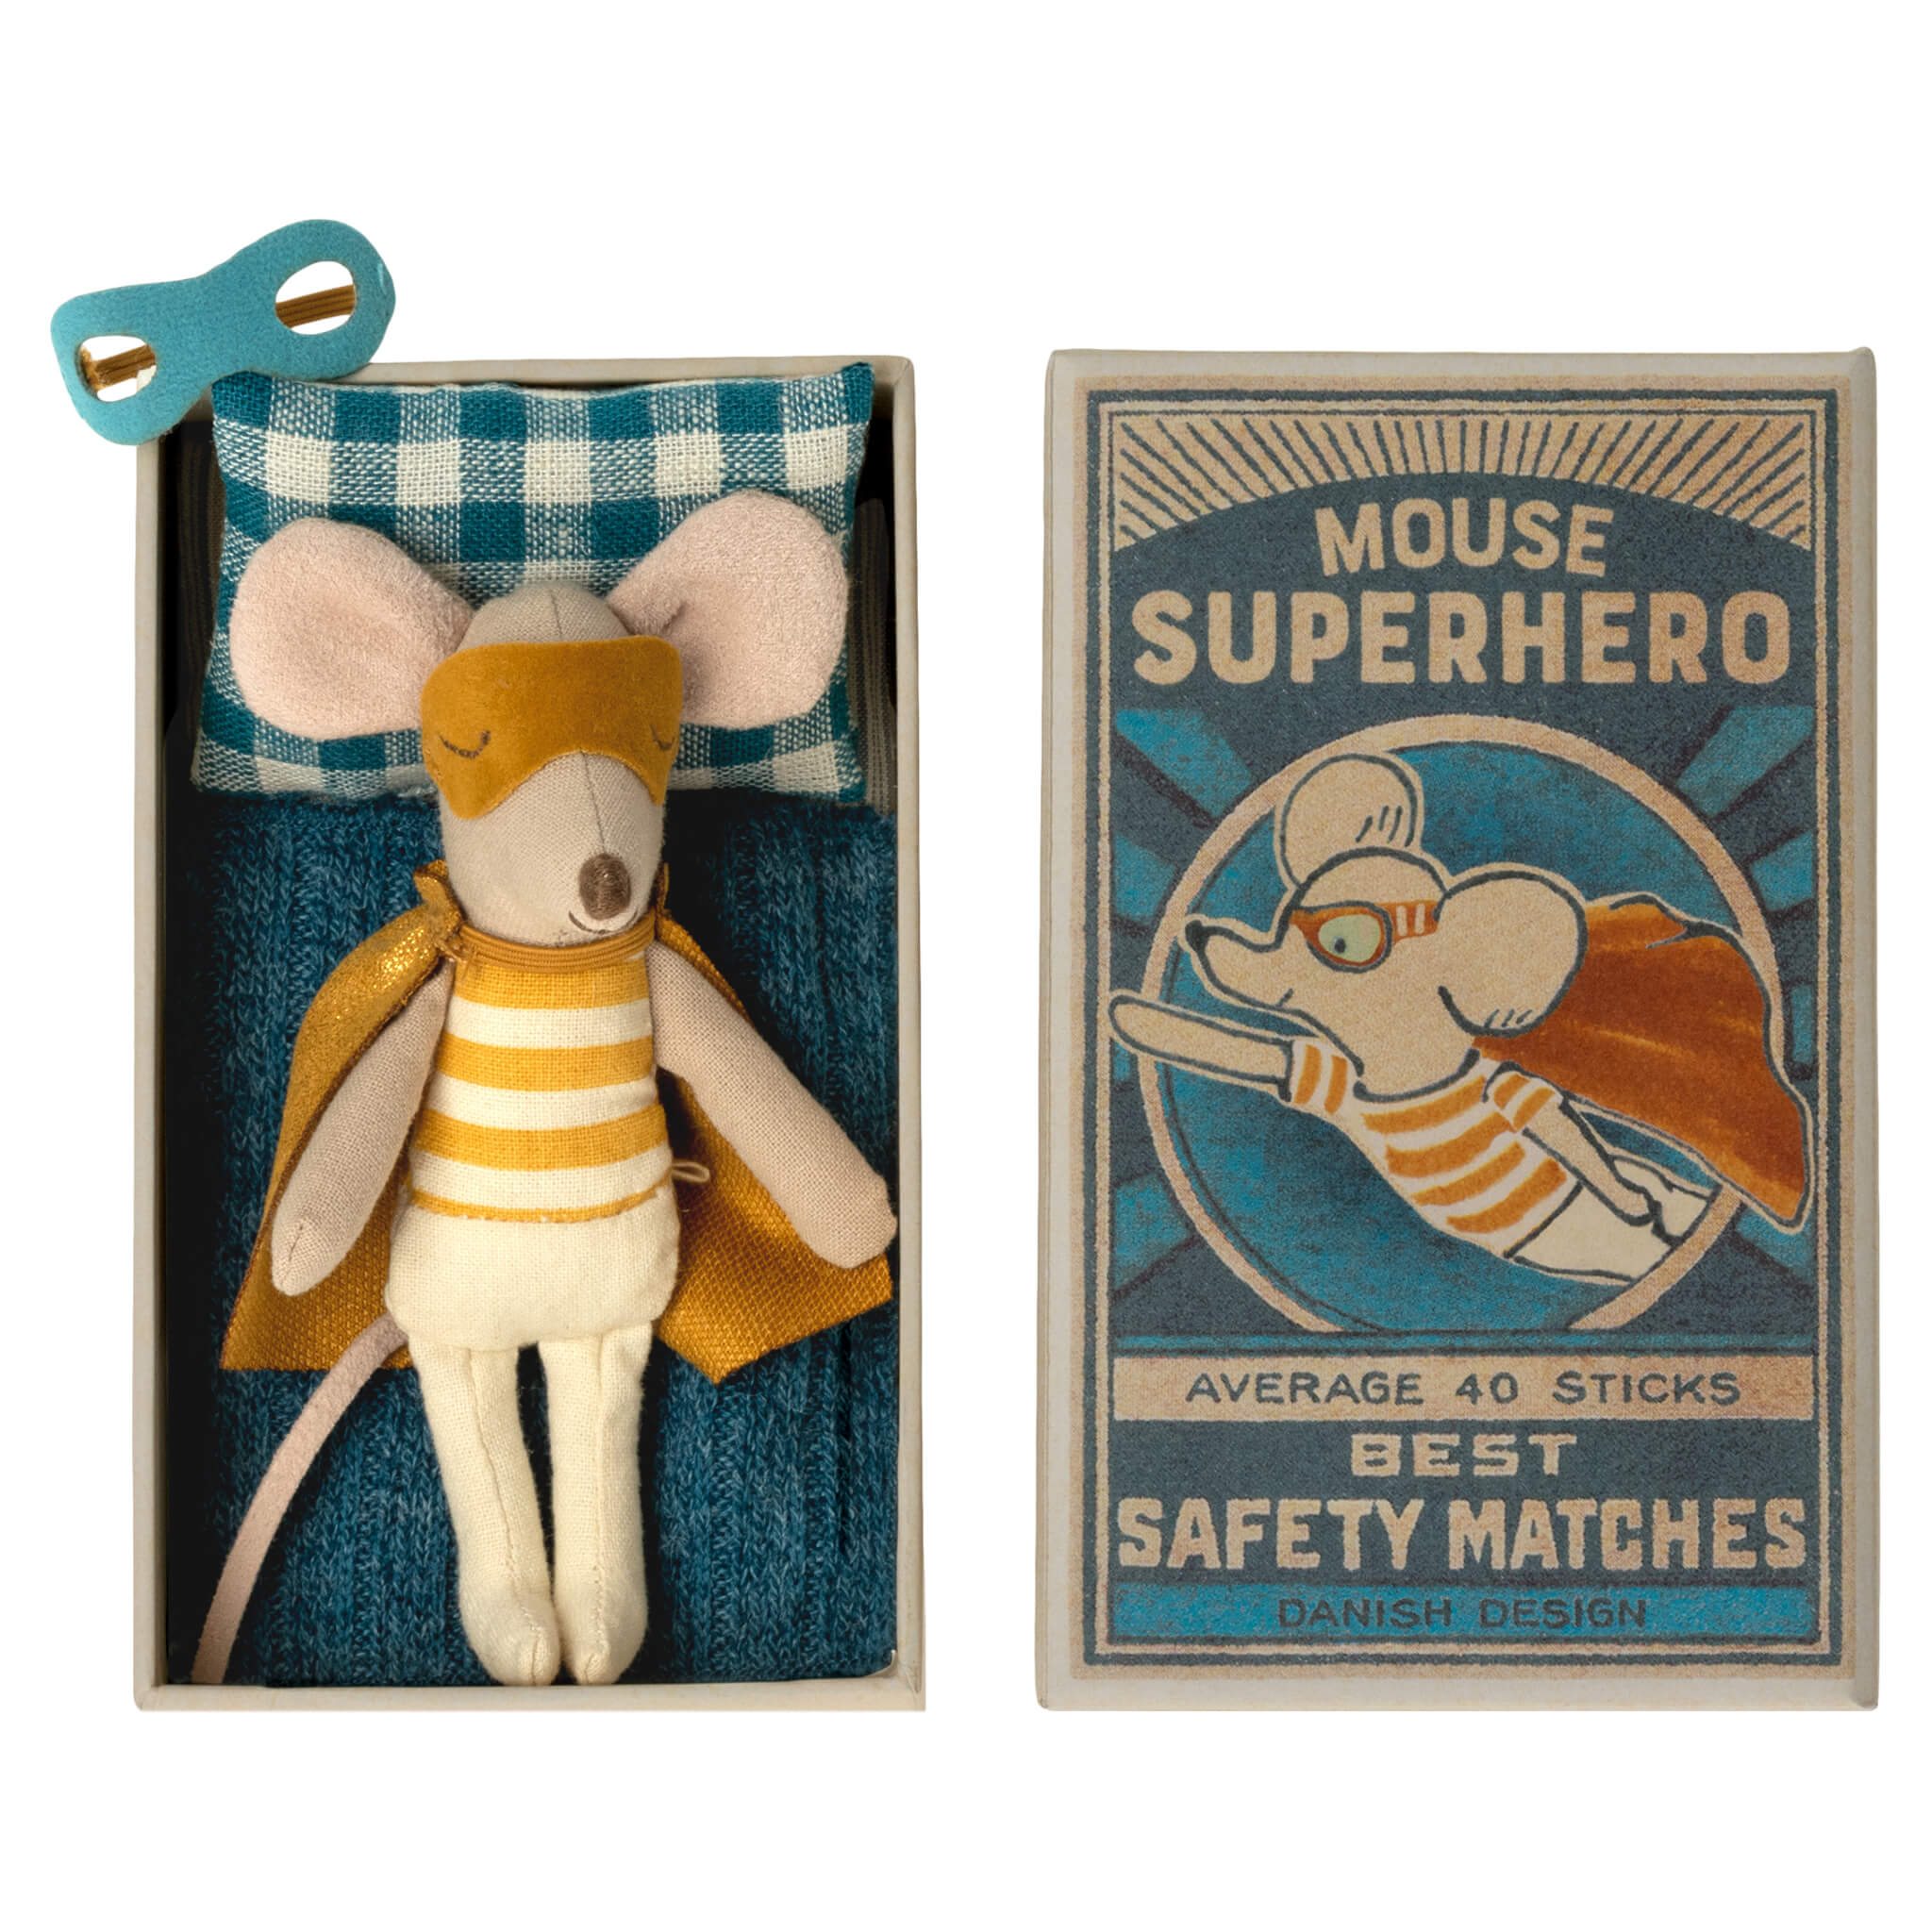 Maileg Superhero Mouse - Little Brother in Matchbox